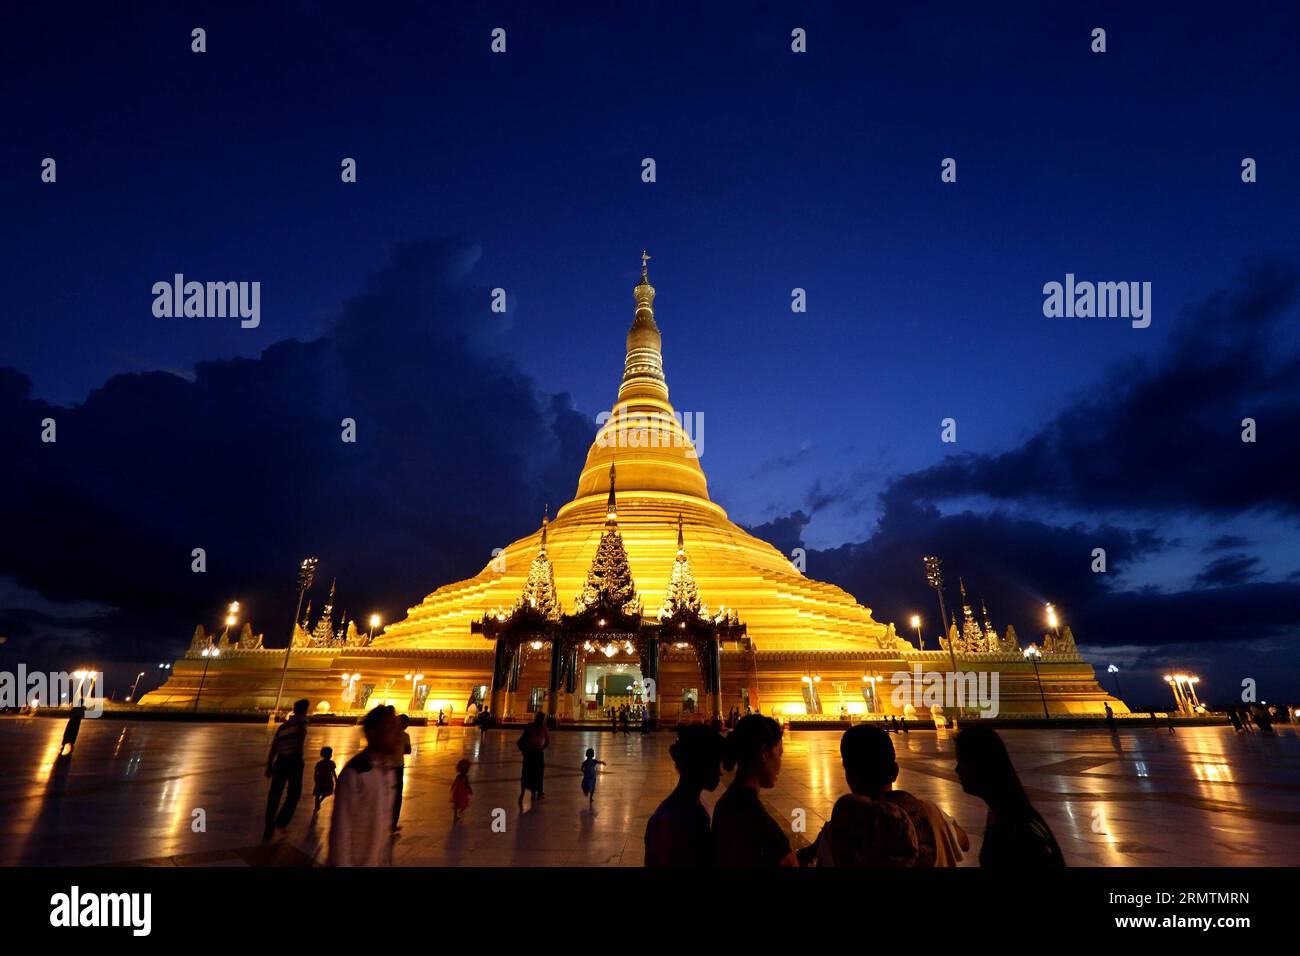 (140912) -- NAY PYI TAW, Sept. 12 -- Photo taken on Sept. 11, 2014 shows a view of the Uppatasanti Pagoda in Nay Pyi Taw, Myanmar. Uppatasanti Pagoda is a prominent landmark in the Burmese capital of Naypyidaw. The pagoda, which houses a Buddha tooth relic from China, is a 325-feet tall replica of Shwedagon Pagoda in Yangon. ) MYANMAR-NAY PYI TAW-UPPATASANTI PAGODA UxAung PUBLICATIONxNOTxINxCHN   Nay Pyi Taw Sept 12 Photo Taken ON Sept 11 2014 Shows a View of The Uppatasanti Pagoda in Nay Pyi Taw Myanmar Uppatasanti Pagoda IS a Prominent Landmark in The Burmese Capital of Naypyidaw The Pagoda Stock Photo